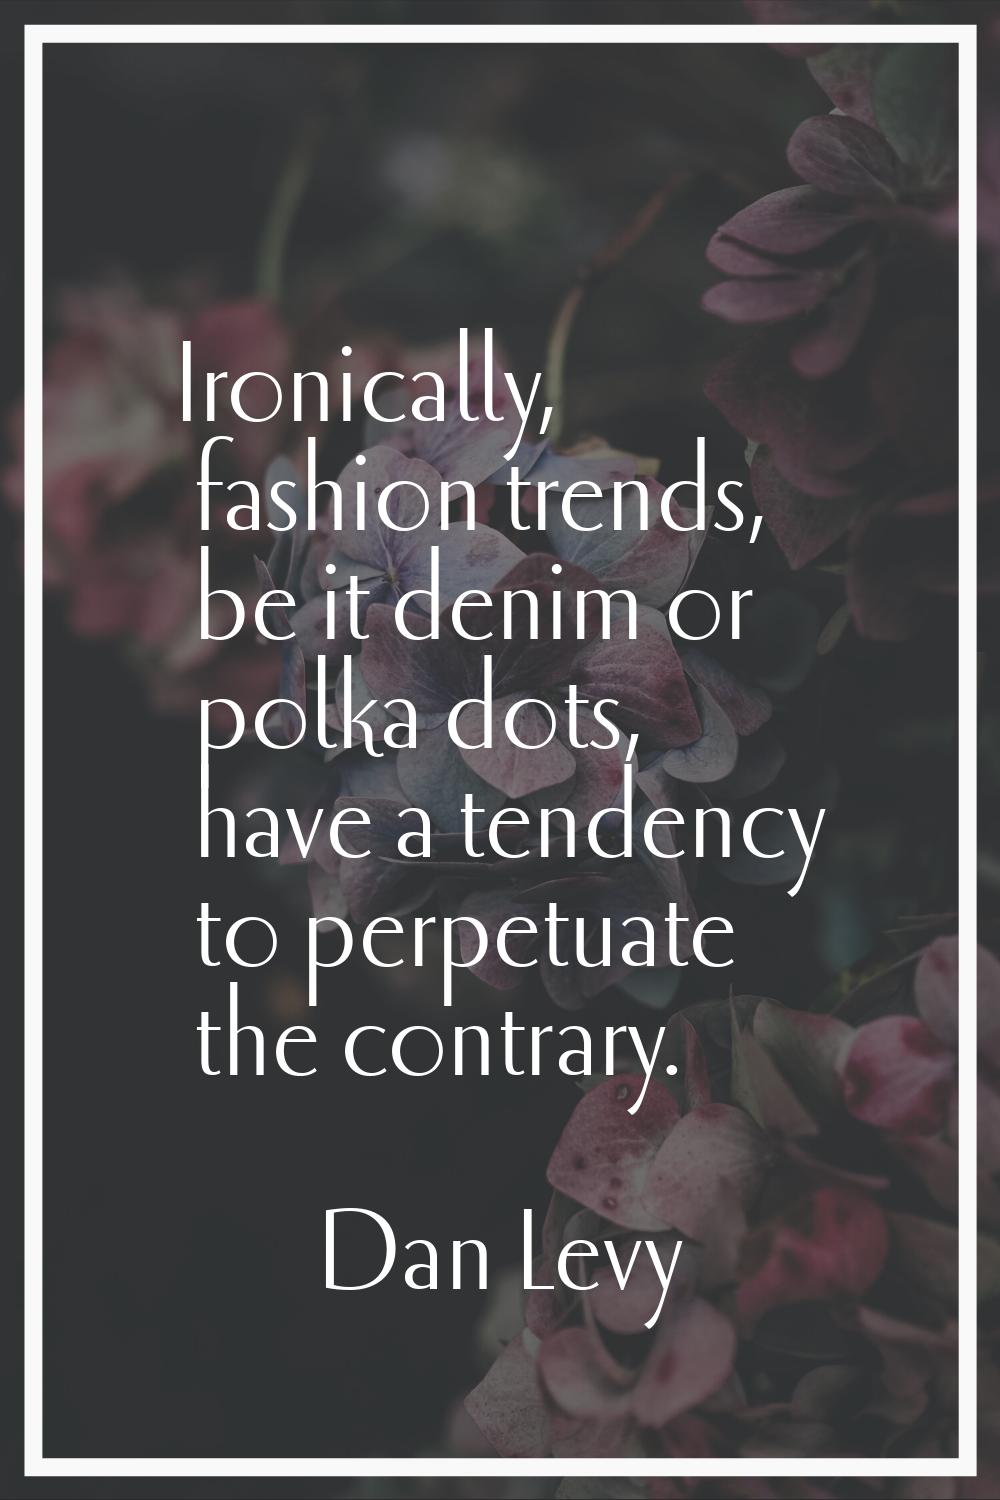 Ironically, fashion trends, be it denim or polka dots, have a tendency to perpetuate the contrary.